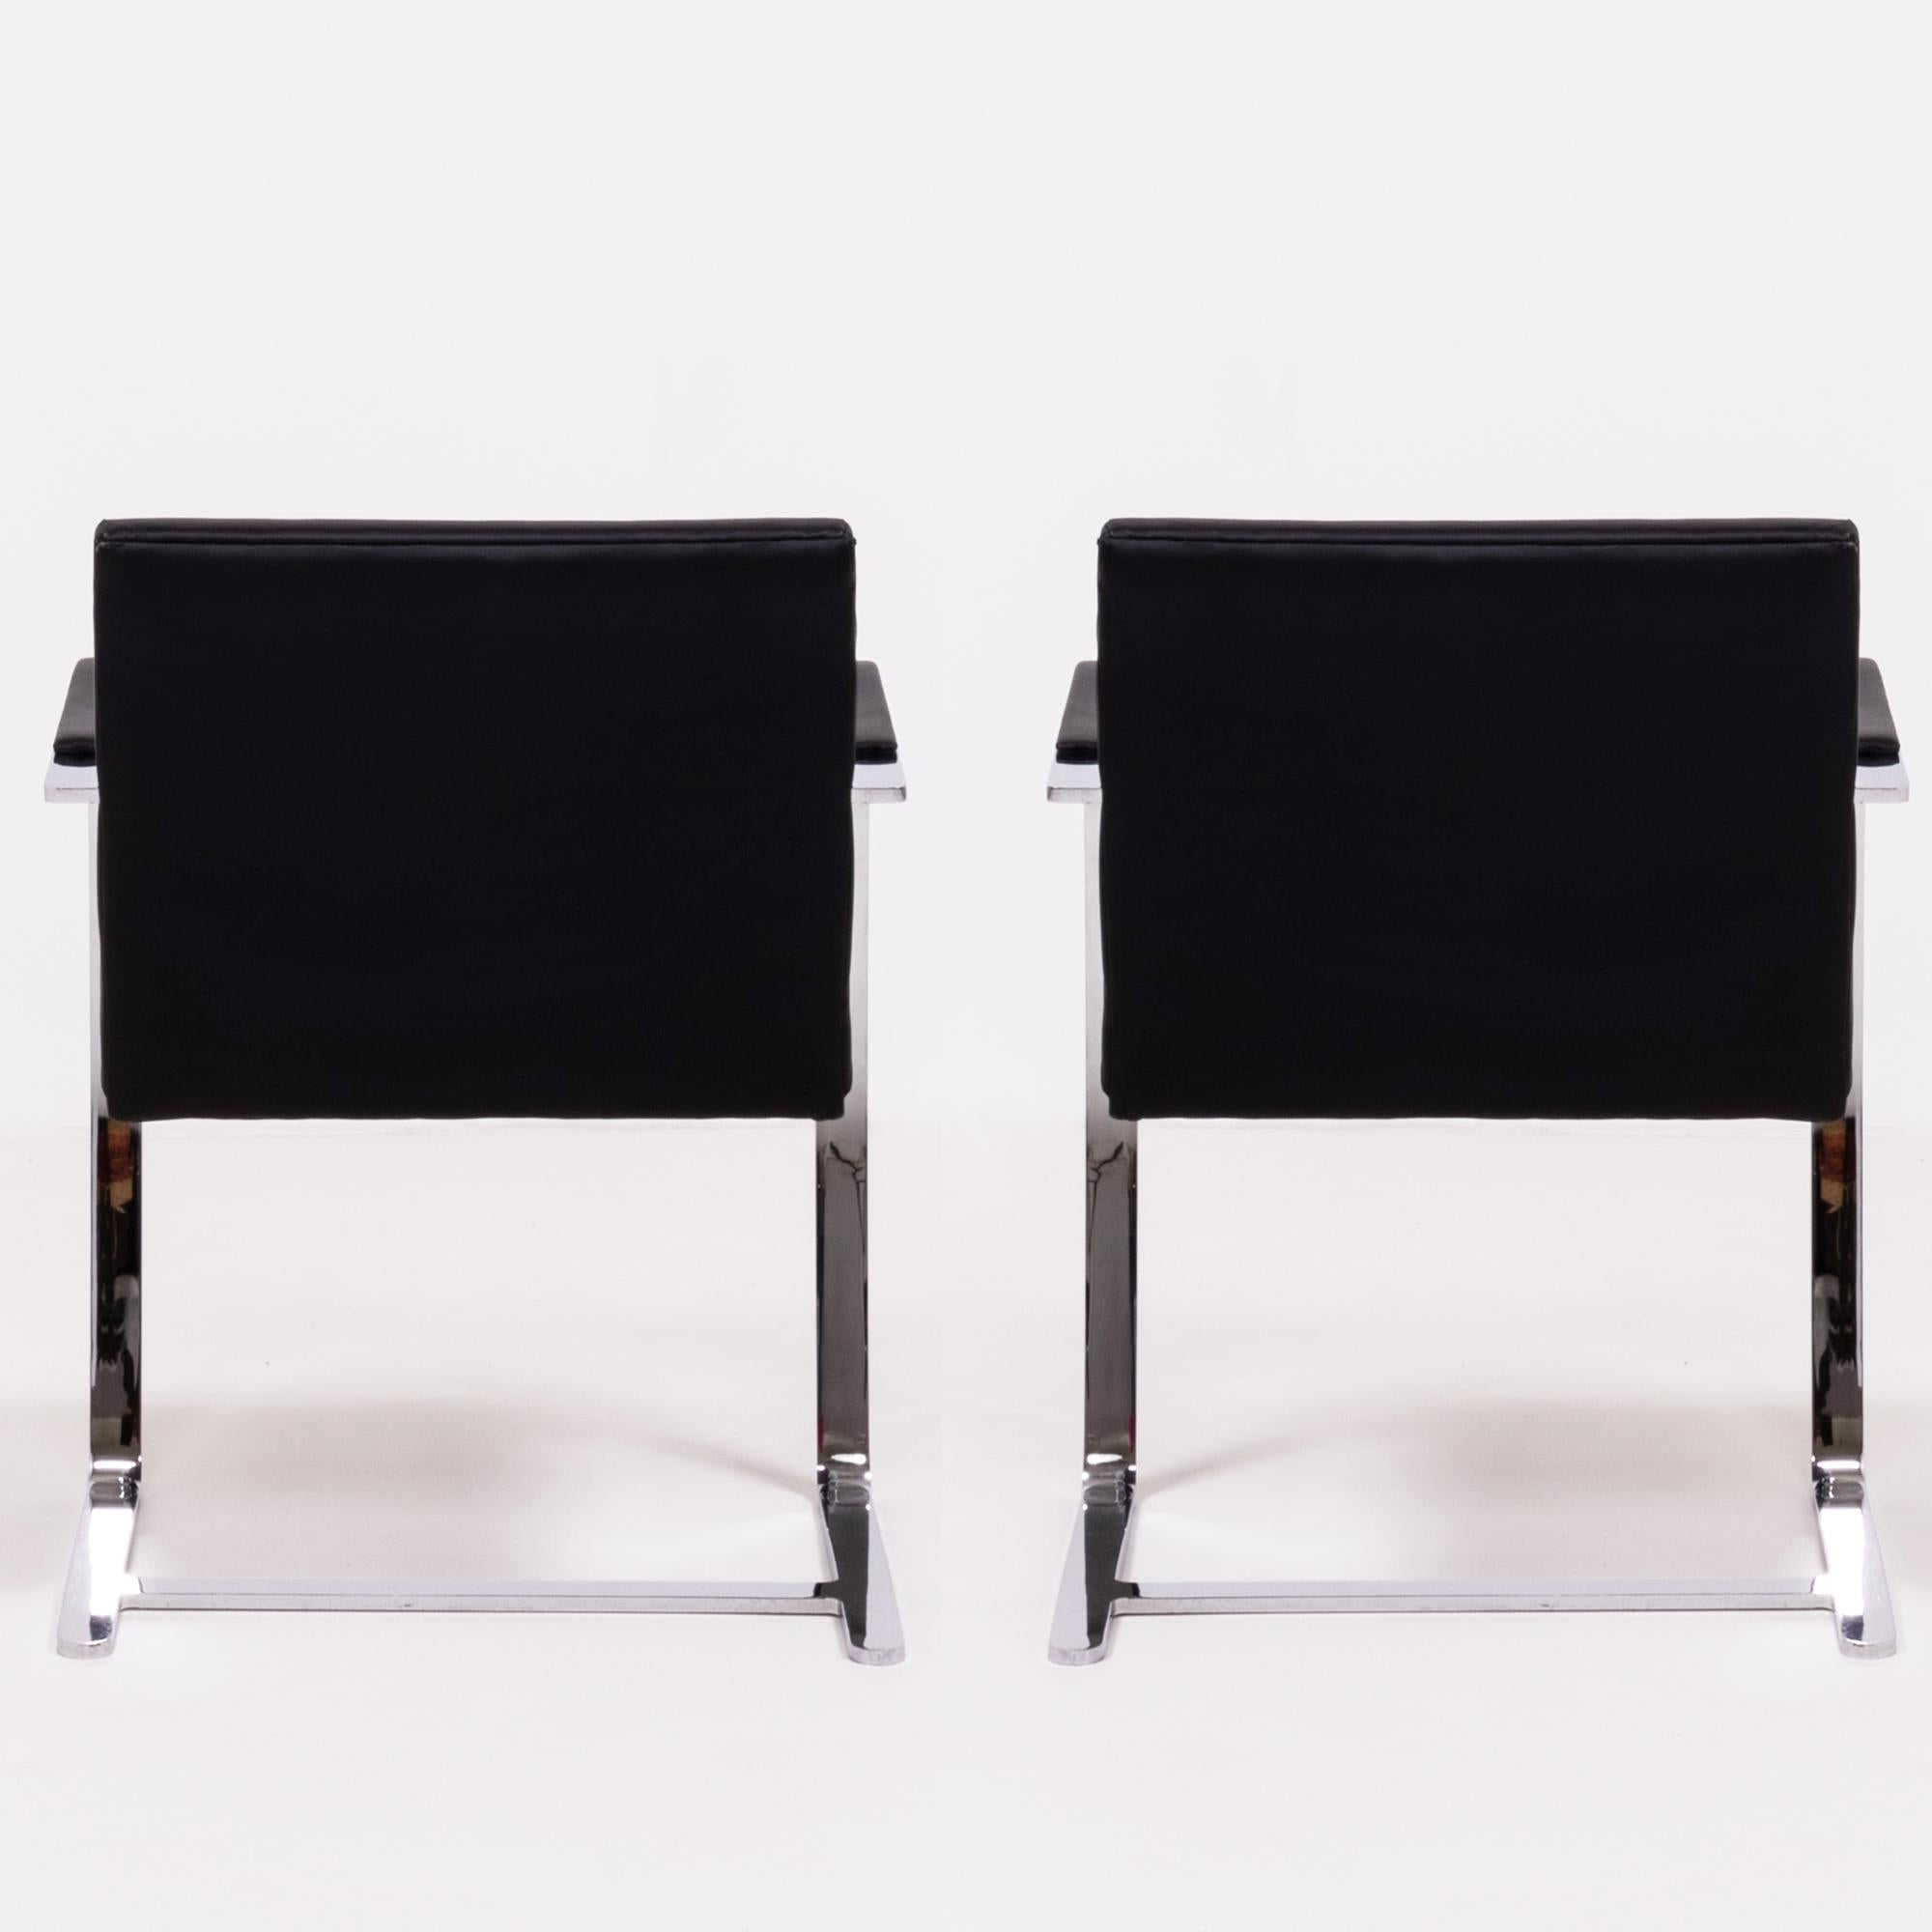 Originally designed by Mies van der Rohe in 1930 for his House in Brno, Czech Republic, the Brno chair remains a design icon.

Sleek and simple, this set of two chairs are upholstered in black leather and feature slim chrome frames with curved